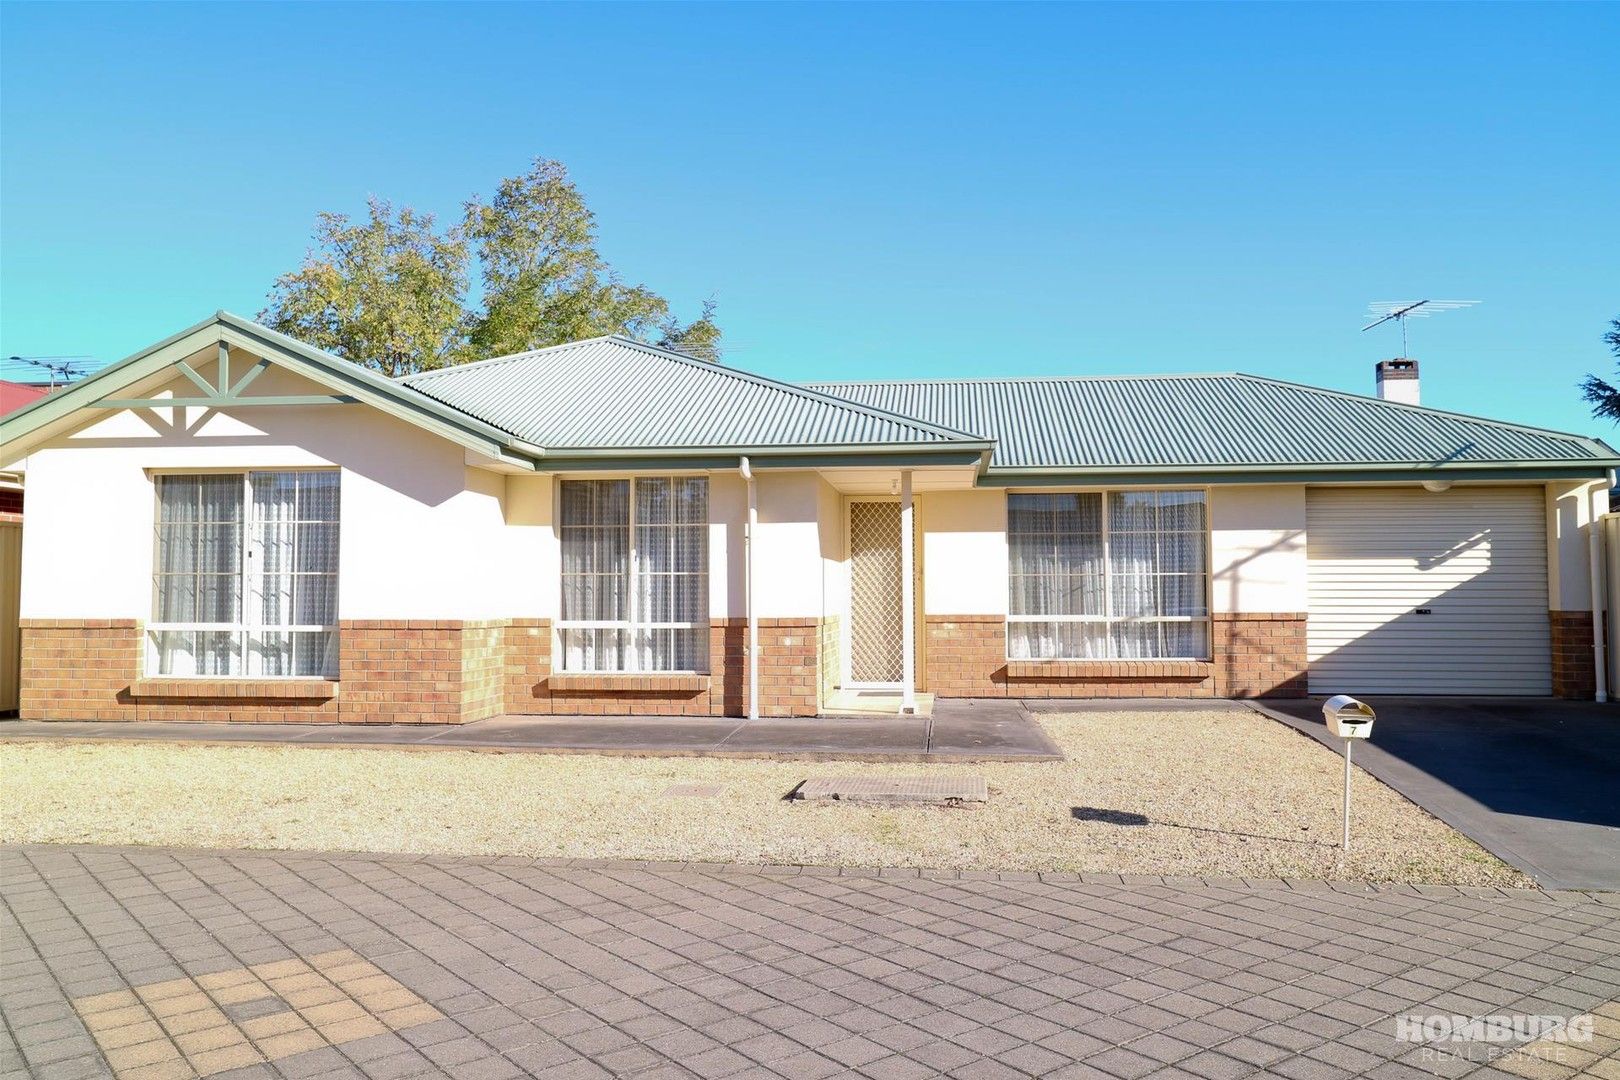 3 bedrooms House in 7/30A Second Street NURIOOTPA SA, 5355